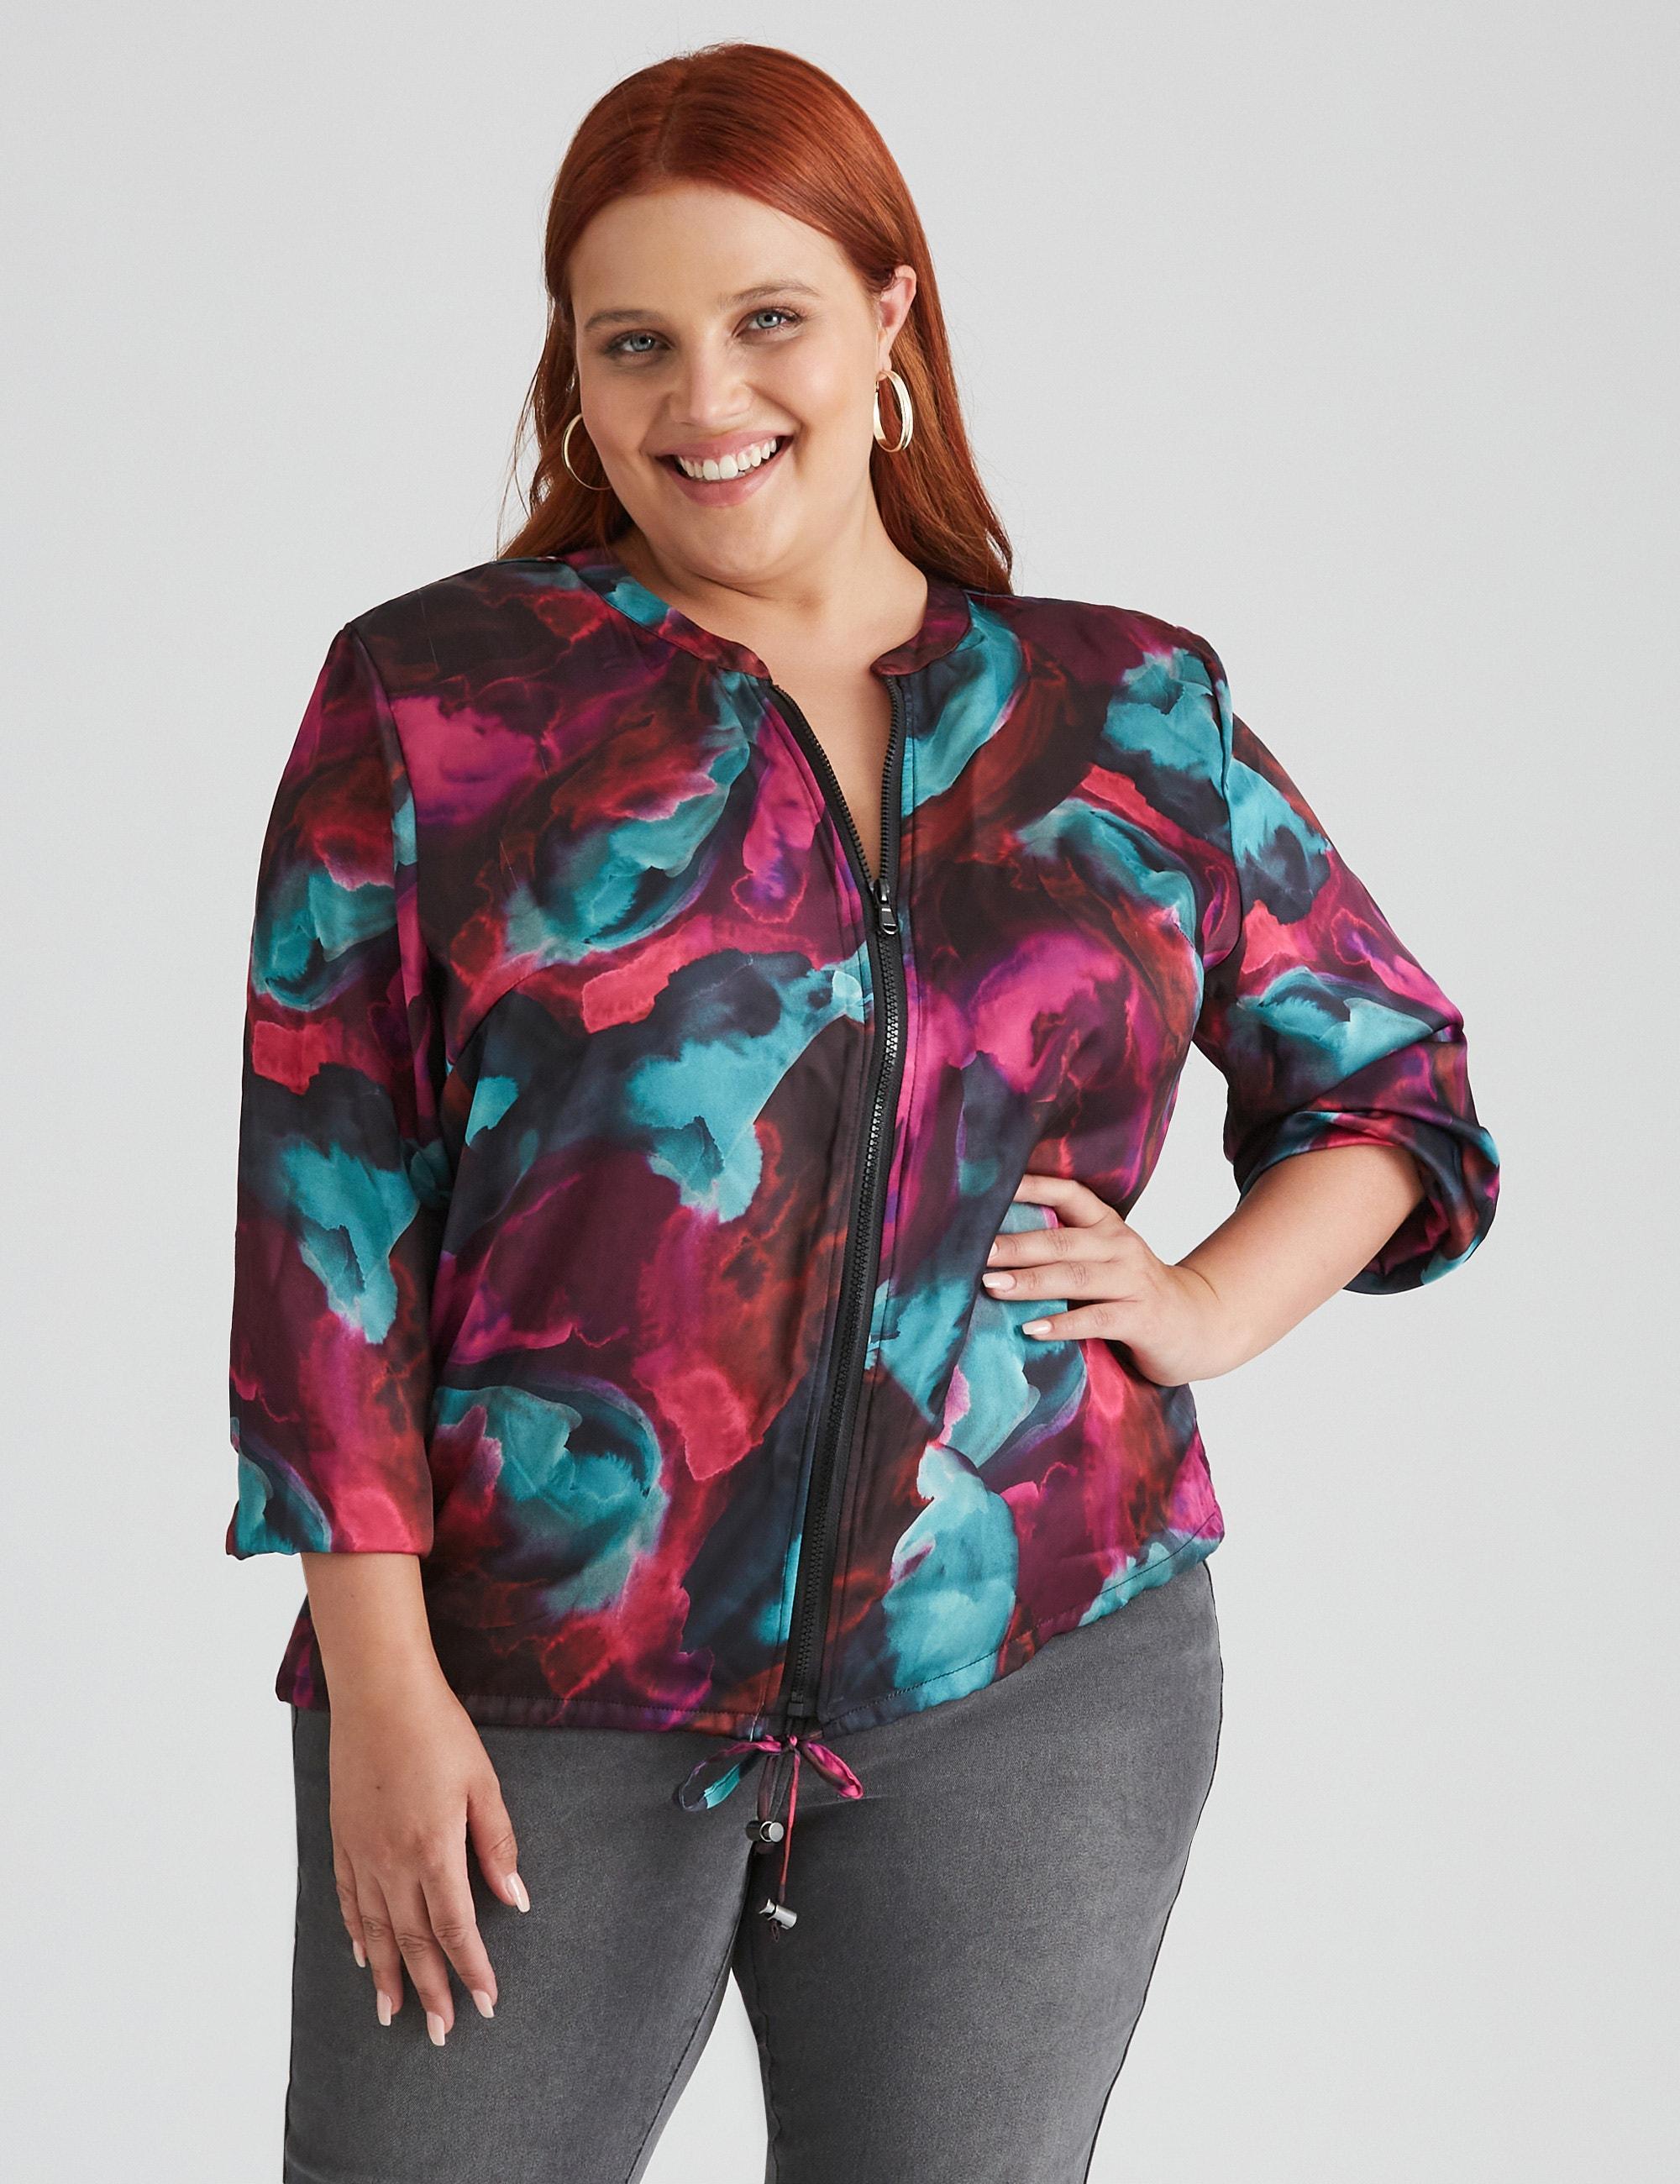 BeMe - Plus Size - Womens Regular Jacket - Pink Winter Coat - Abstract - Bomber - Long Sleeve - Blazer - Printed - Casual Work Wear - Office Clothing